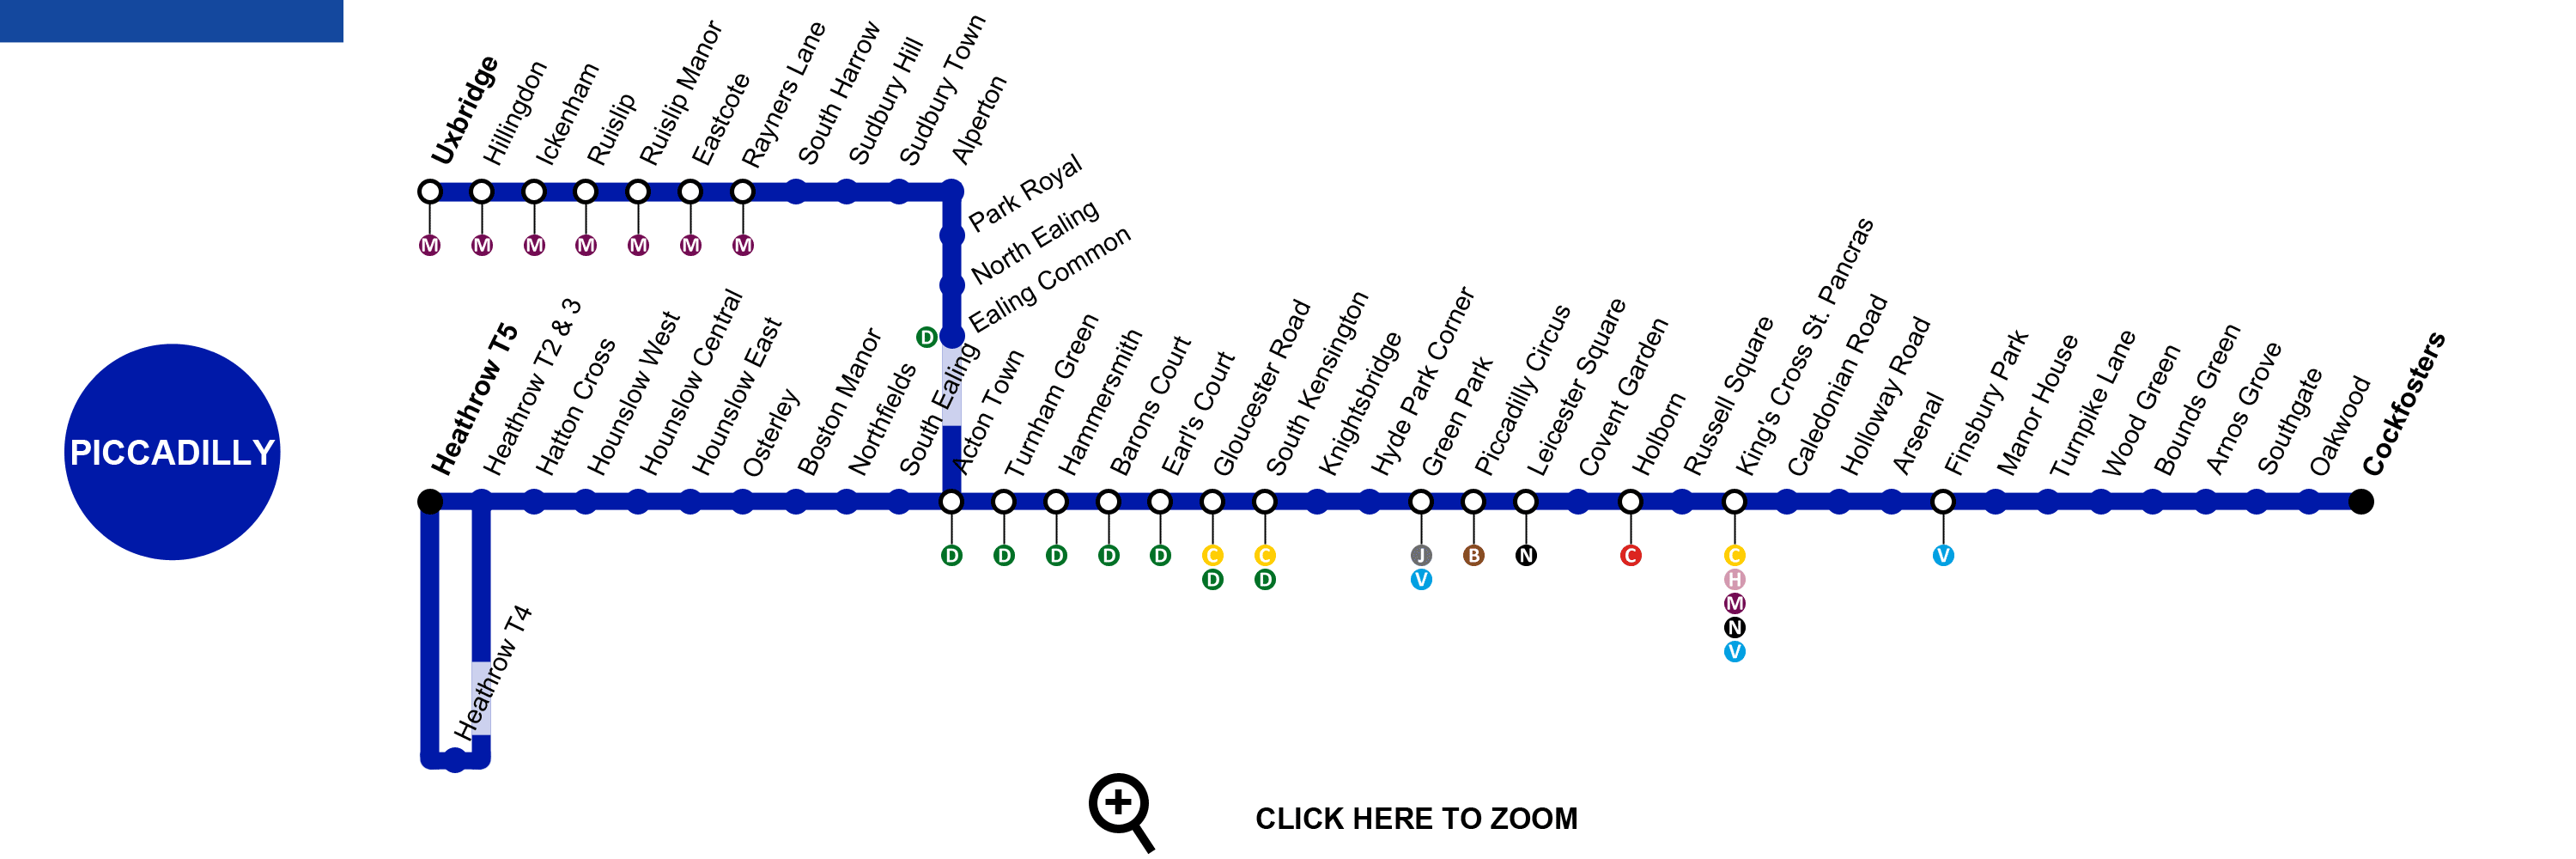 Piccadilly-line-map.png